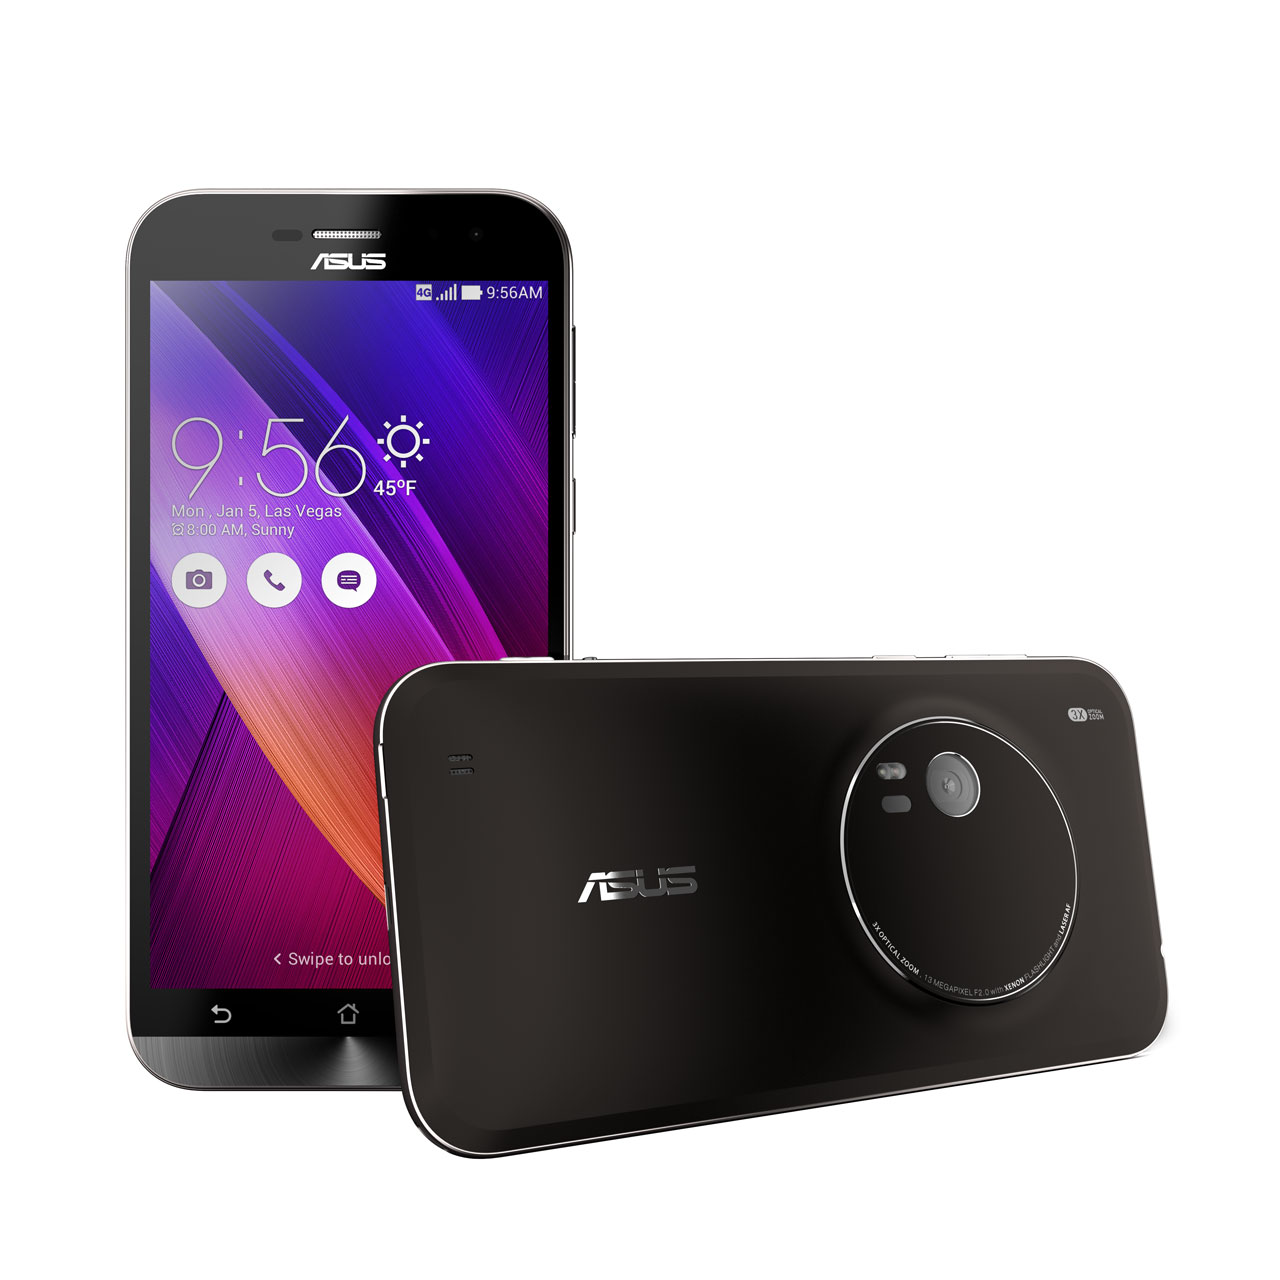 ASUS-ZenFone-Zoom_front-and-back